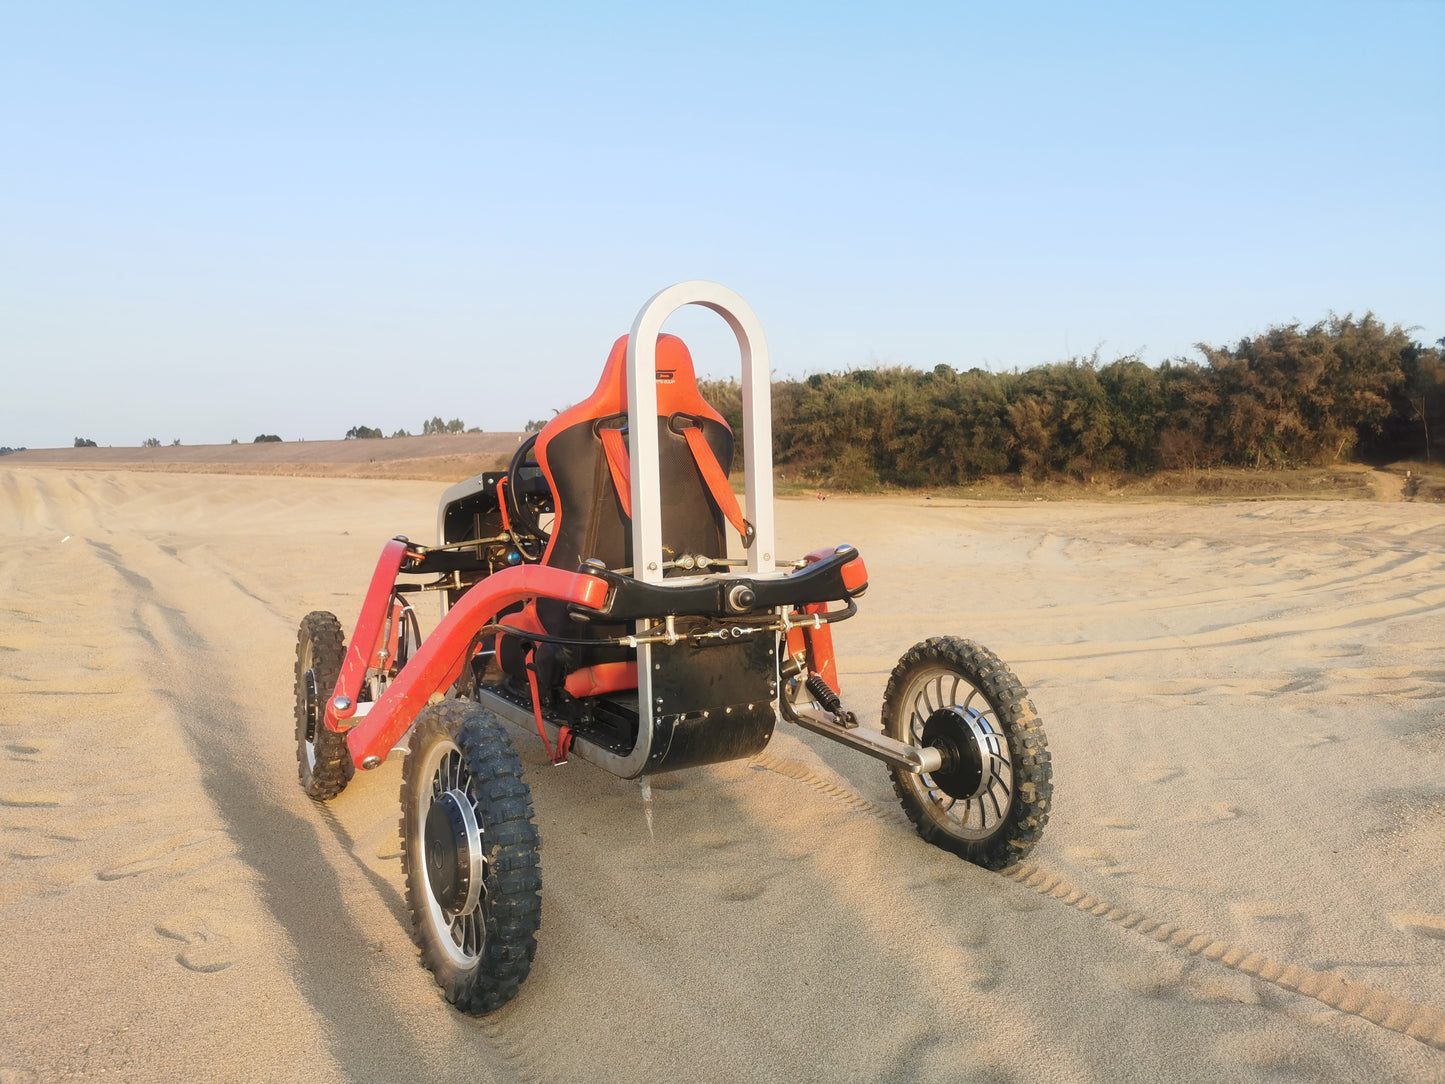 All-terrain electric off-road vehicle